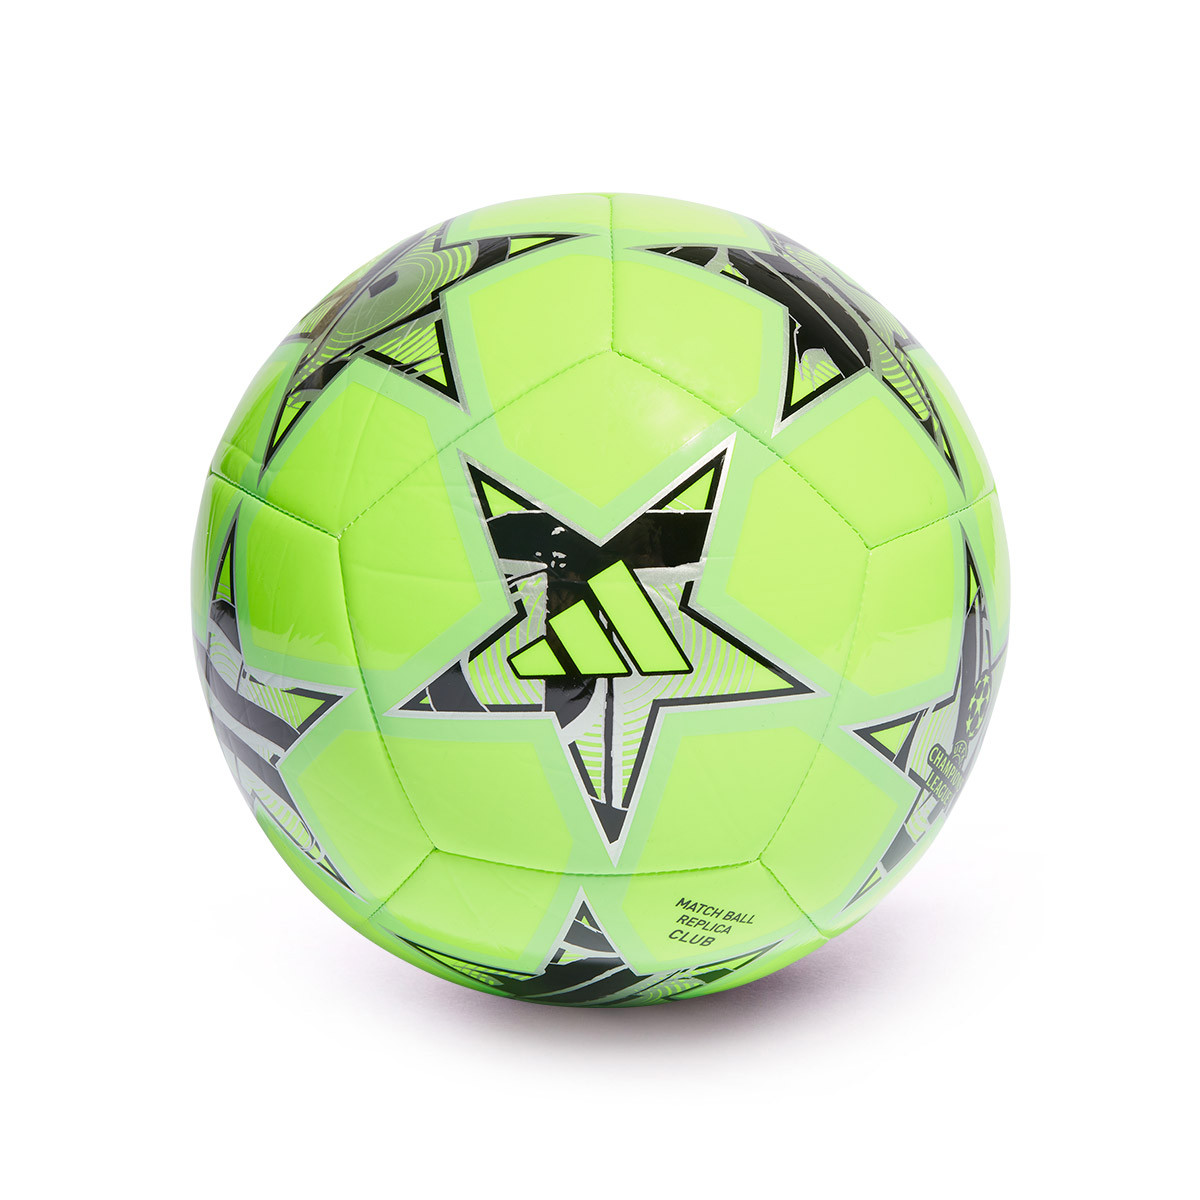 adidas Official Champions League 2023-2024 Ball